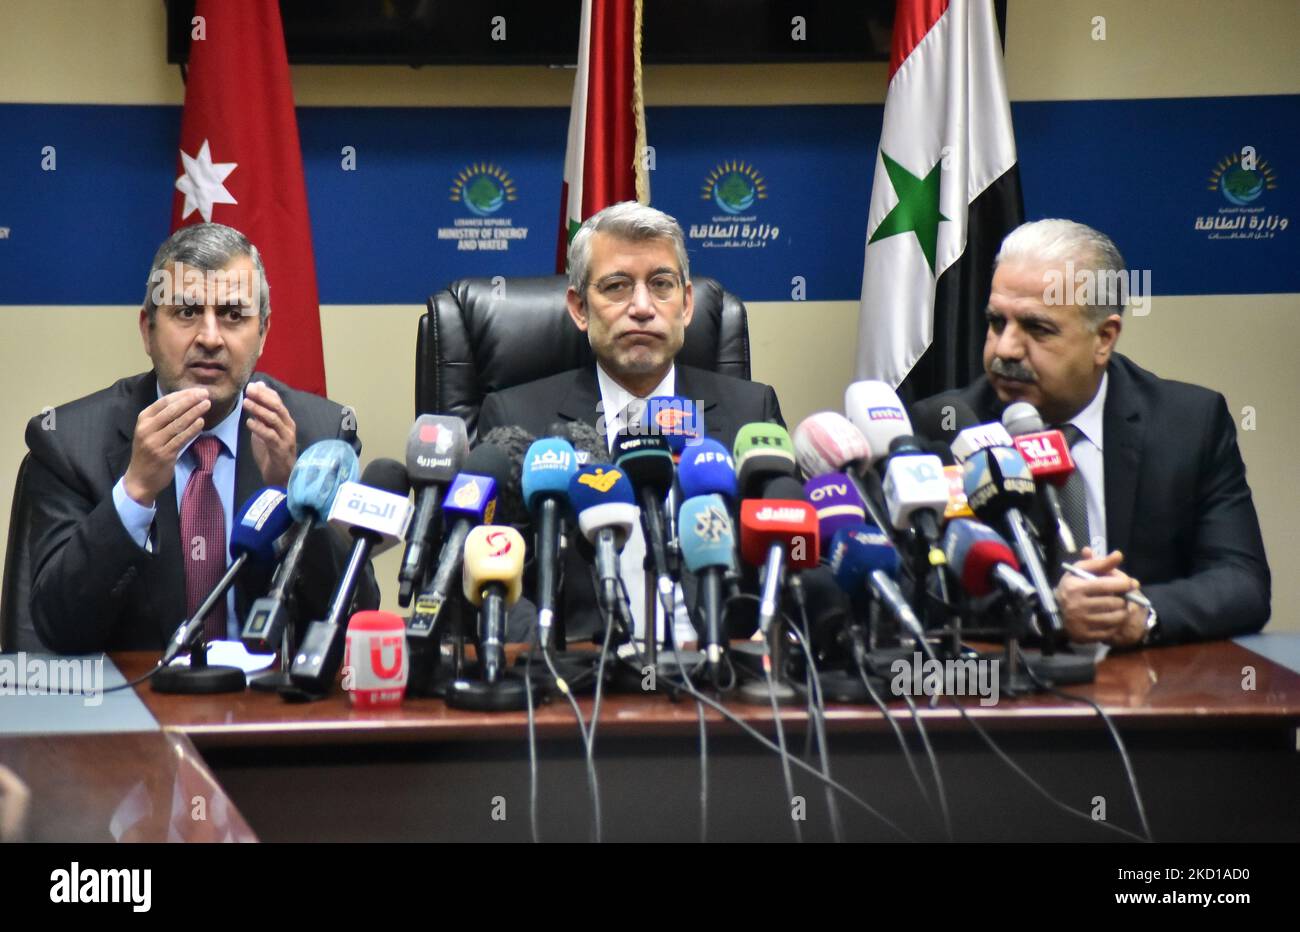 Lebanon's Energy Minister Walid Fayad (R), Syria's Electricity Minister Ghassan al-Zamil (2nd R) and Jordan's Minister of Energy and Mineral Resources Saleh Ali Hamed al-Kharabsheh (L) sit during the signing of a deal that will supply Lebanon with electricity, in Beirut on January 26, 2022. (Photo by Fadel Itani/NurPhoto) Stock Photo